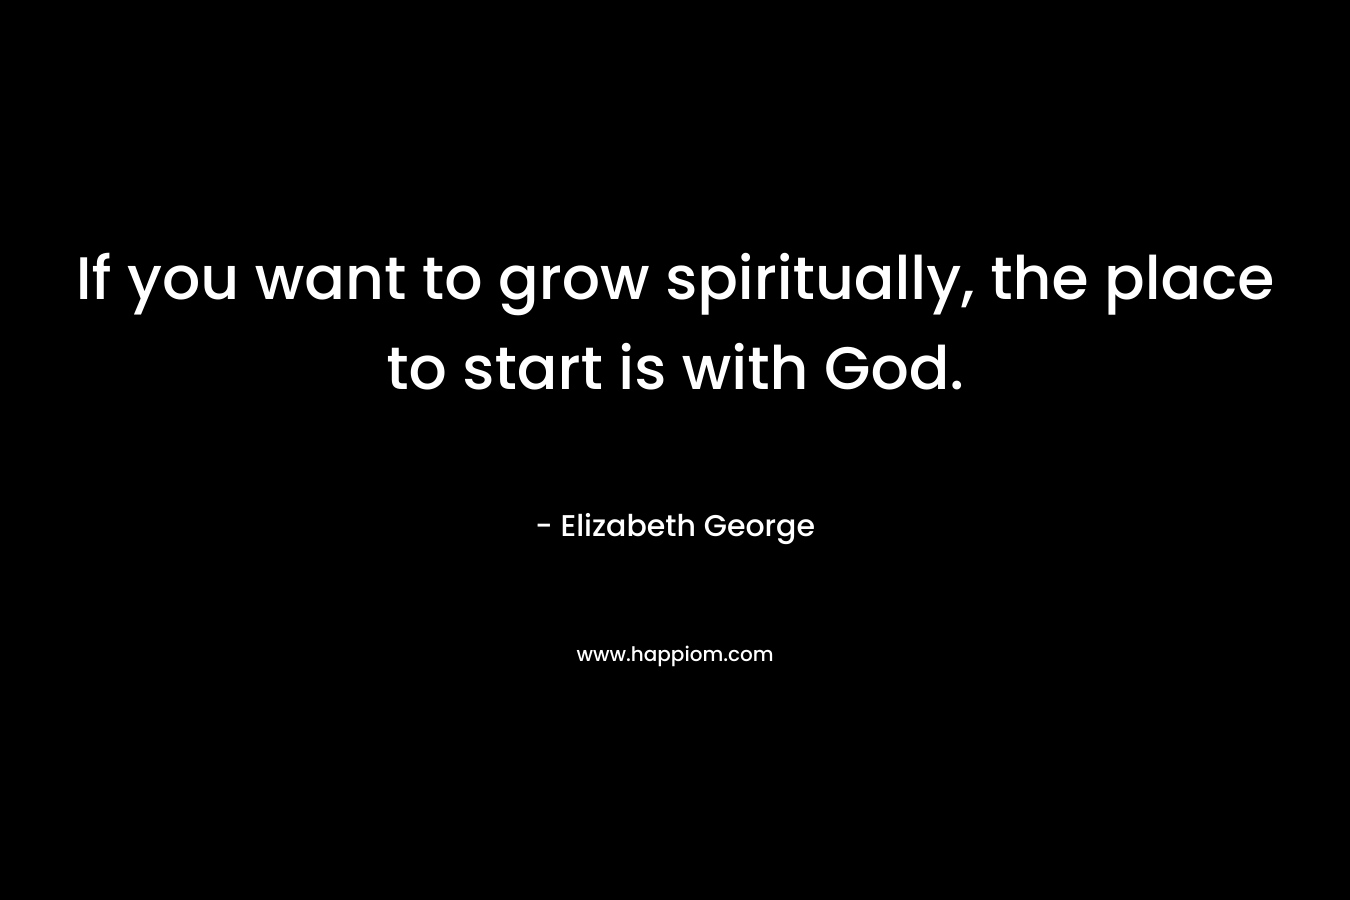 If you want to grow spiritually, the place to start is with God.